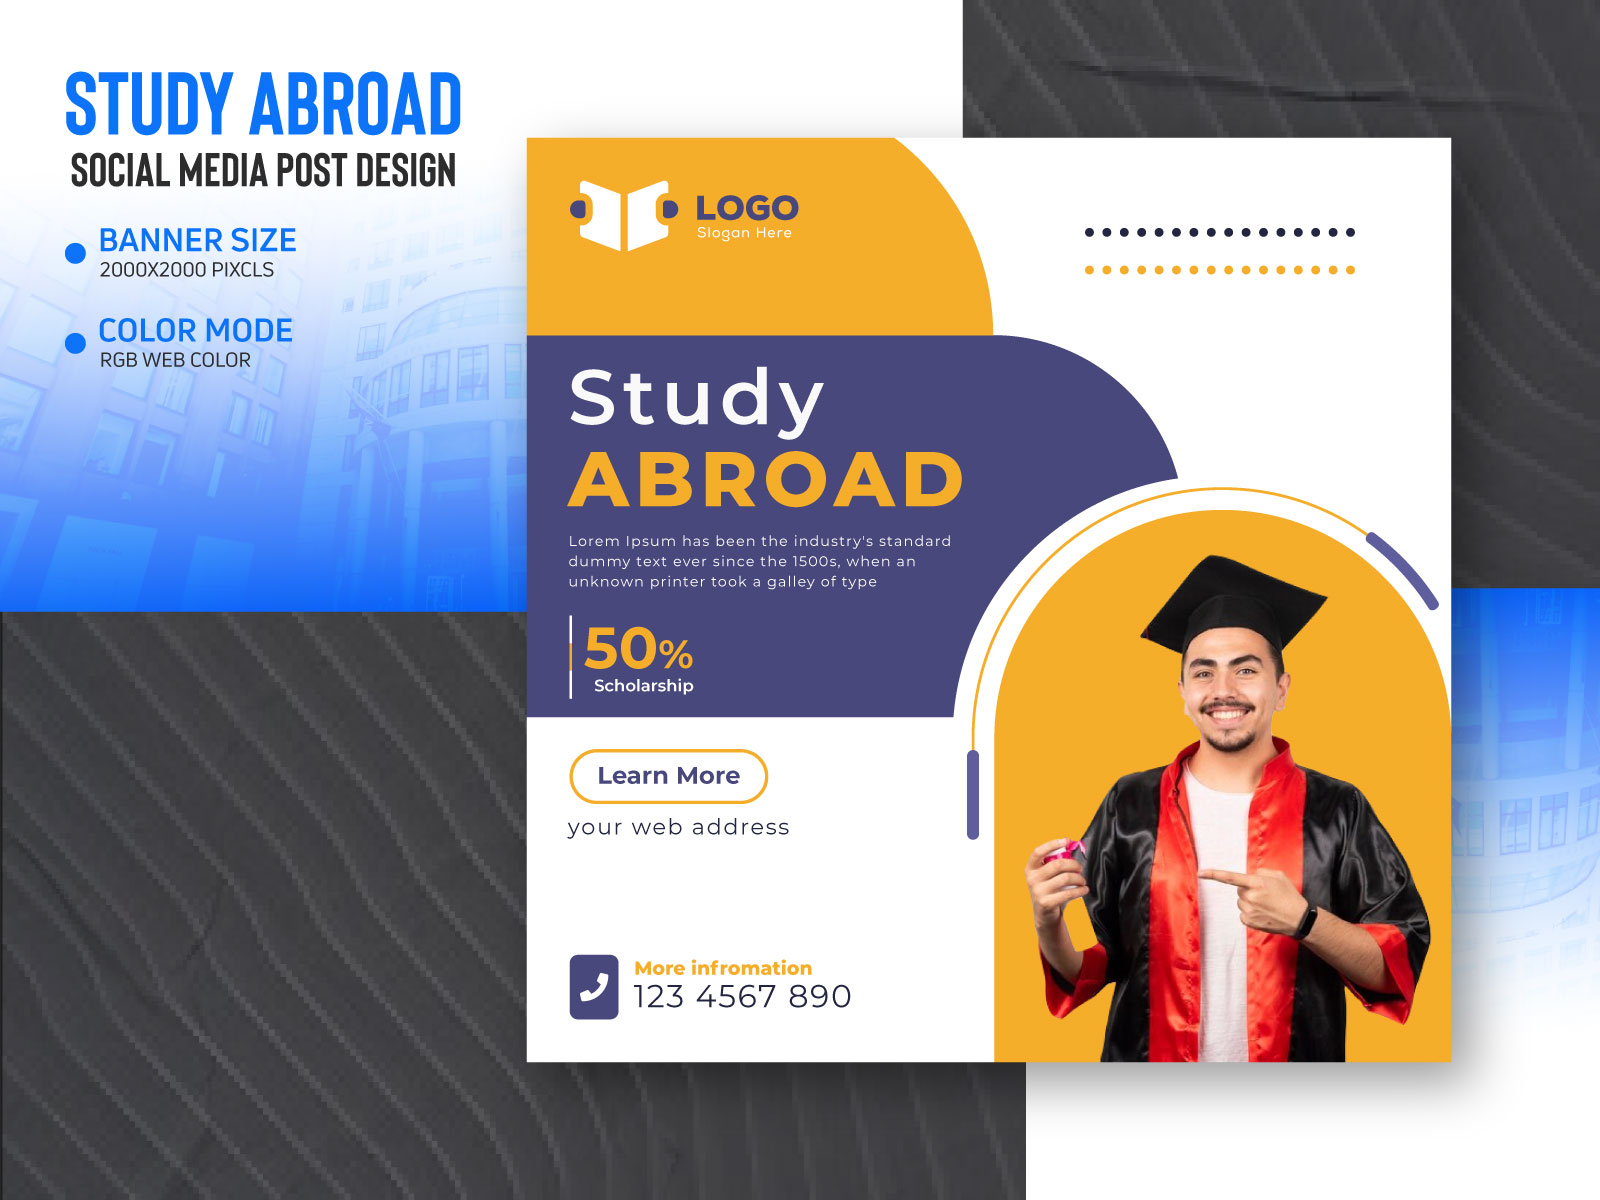 Social Media Study Abroad Banner post Design by MD AMINUR MIAH on Dribbble